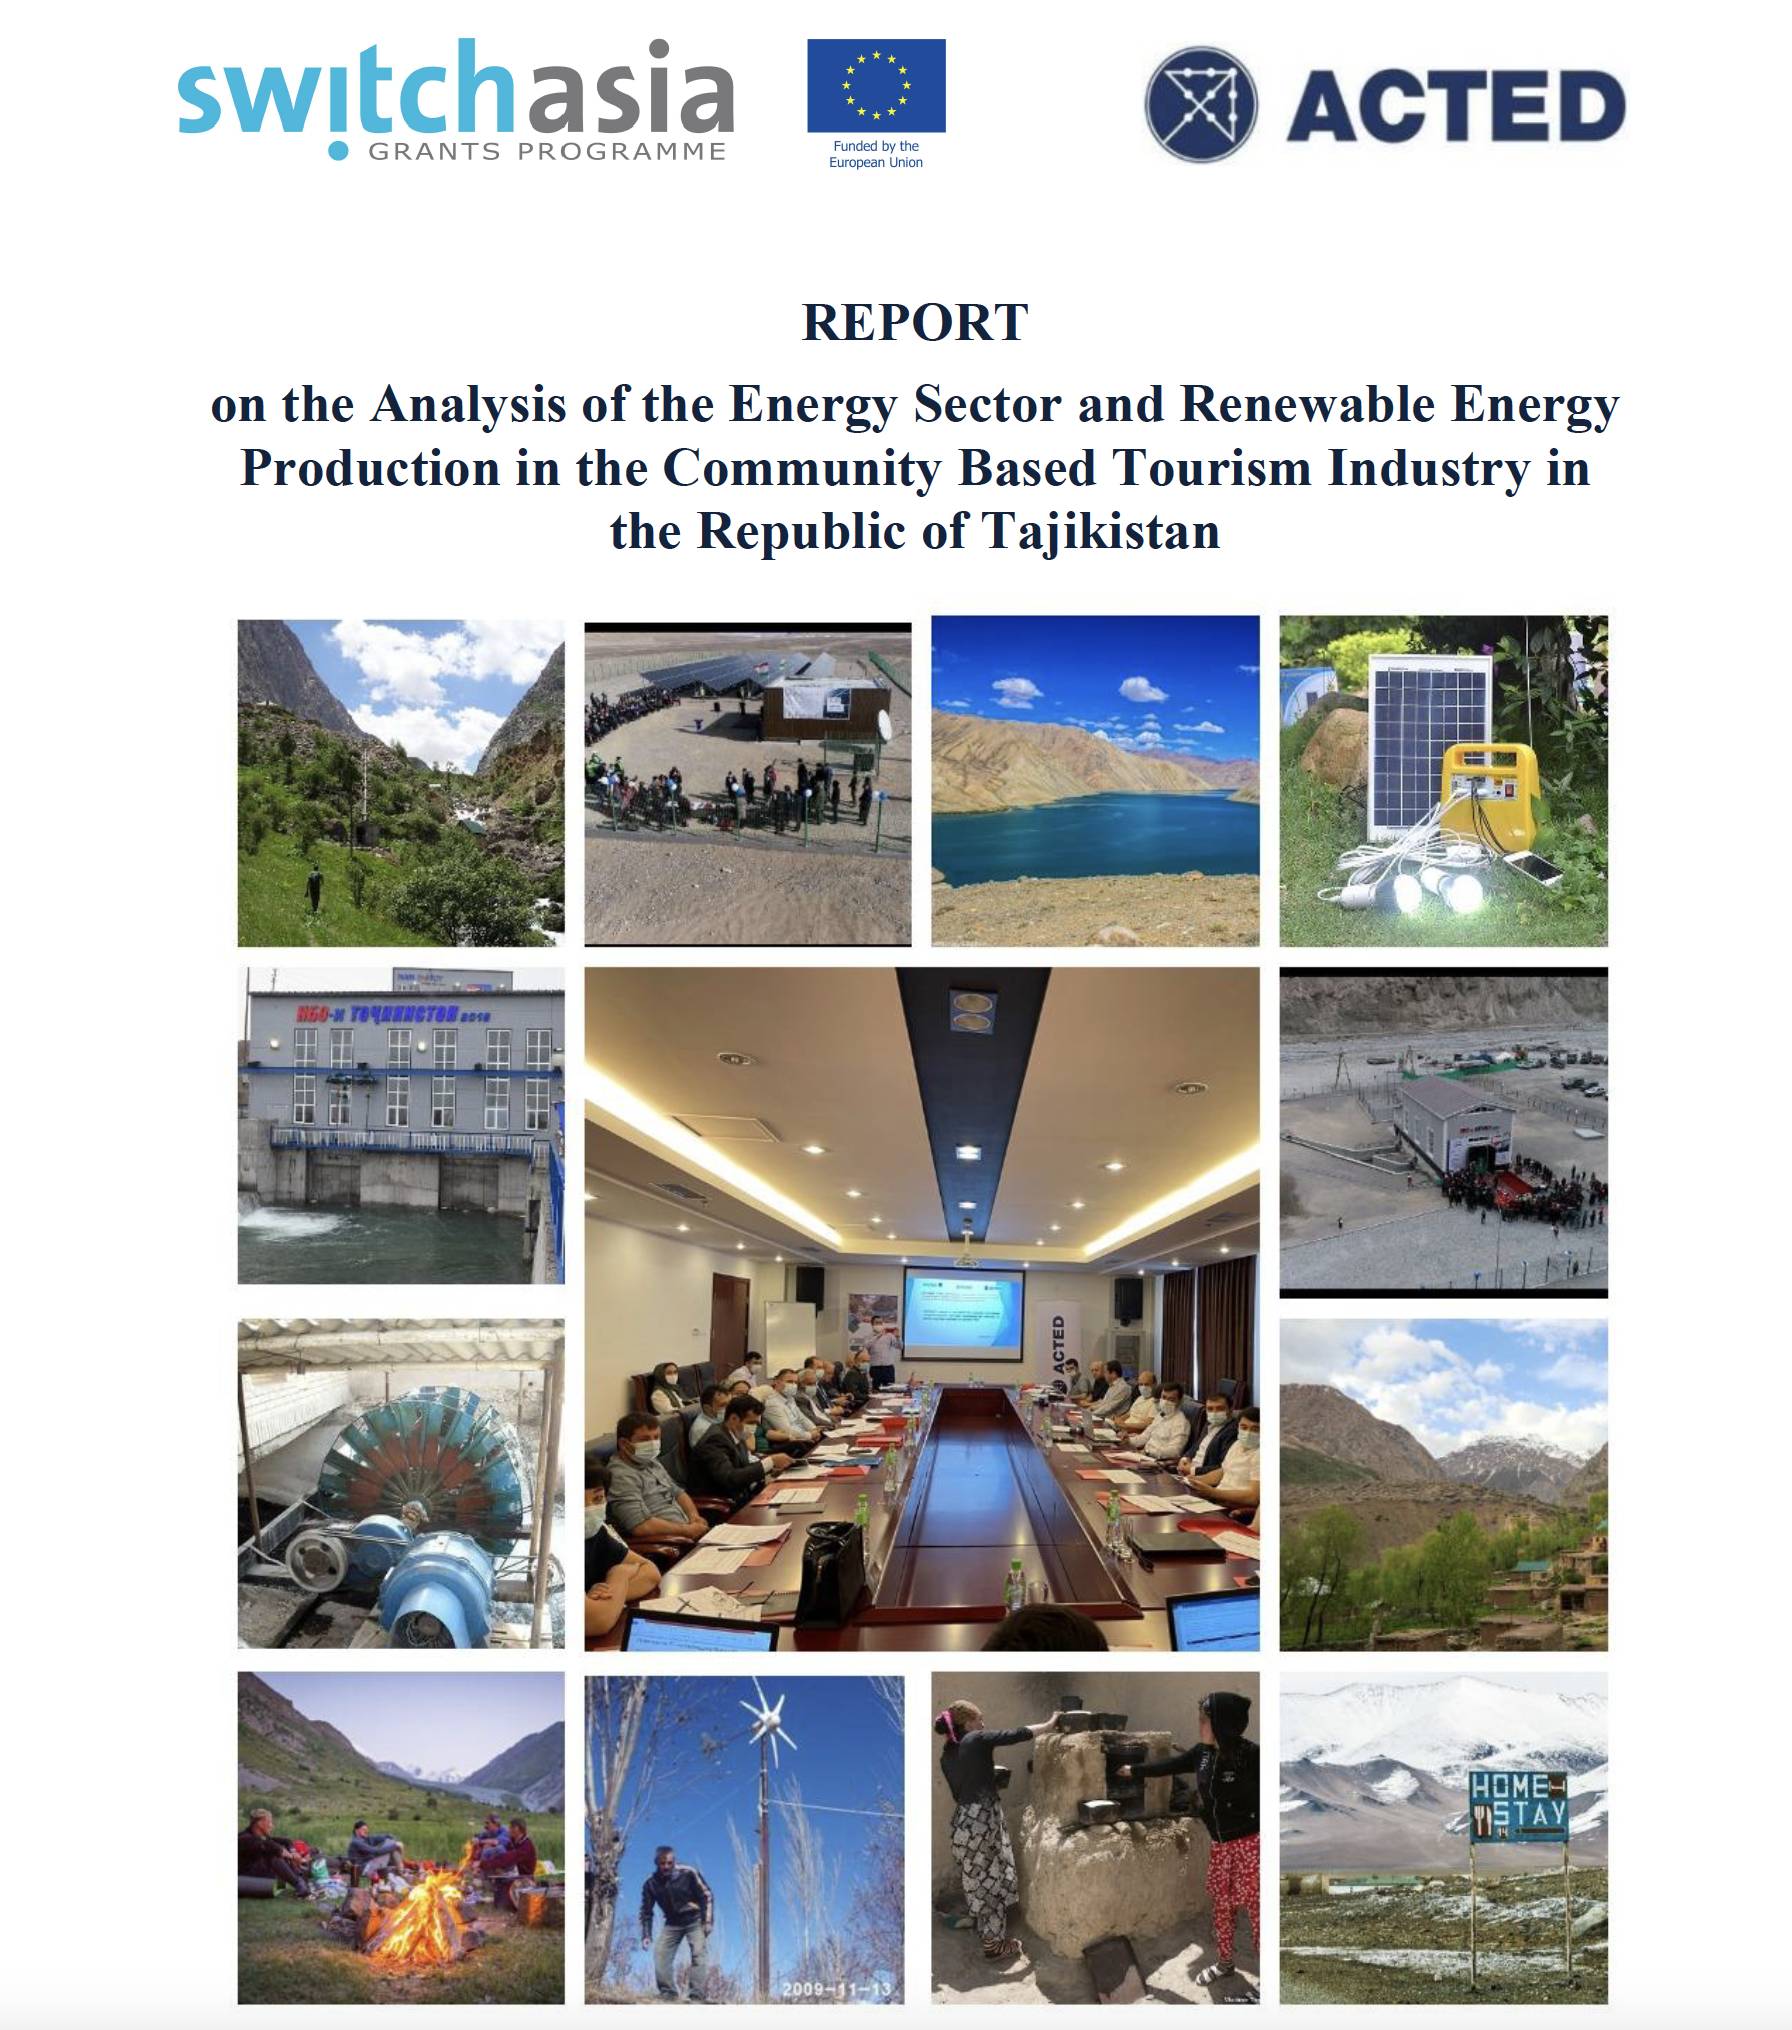 Analysis of the Energy Sector and Renewable Energy Production in the Community Based Tourism Industry in the Republic of Tajikistan